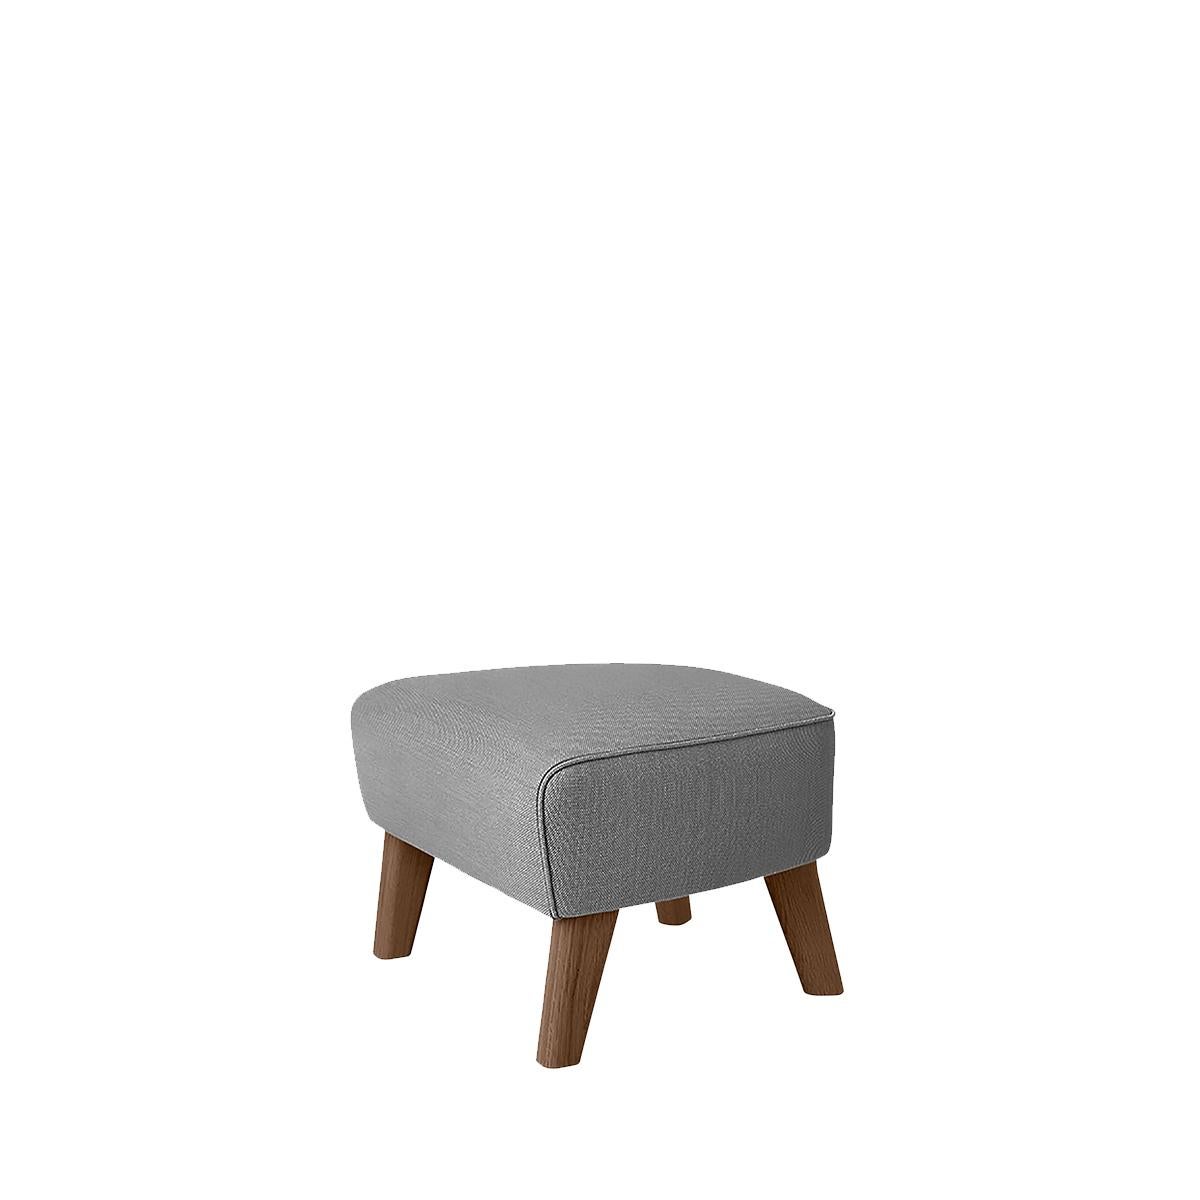 Grey and smoked oak Sahco zero footstool by Lassen
Dimensions: W 56 x D 58 x H 40 cm 
Materials: Textile
Also available: Other colors available.

The my own chair footstool has been designed in the same spirit as Flemming Lassen’s original